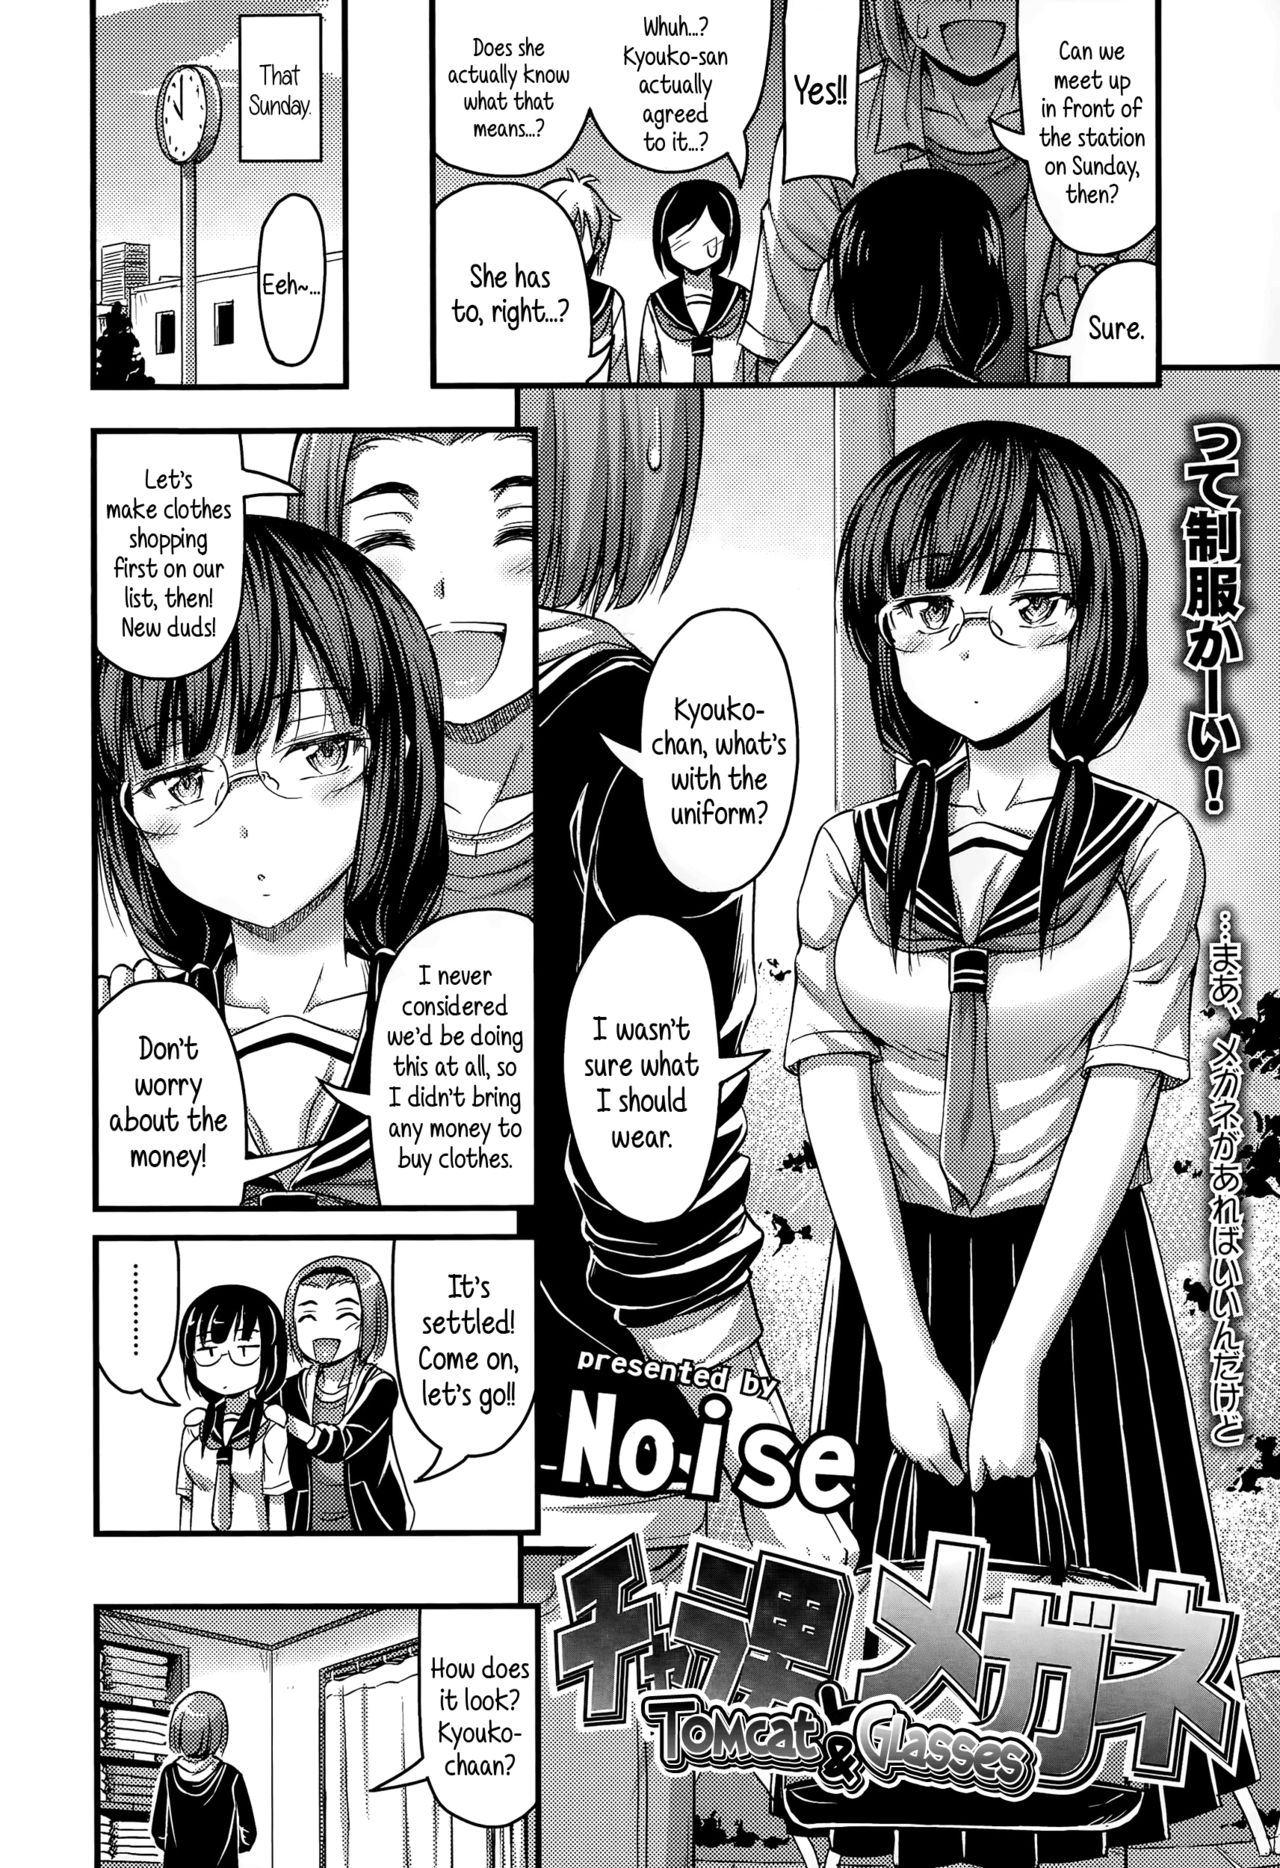 [Noise] Charao to Megane | Tomcat & Glasses (COMIC LO 2015-08) [English] {5 a.m.} 1